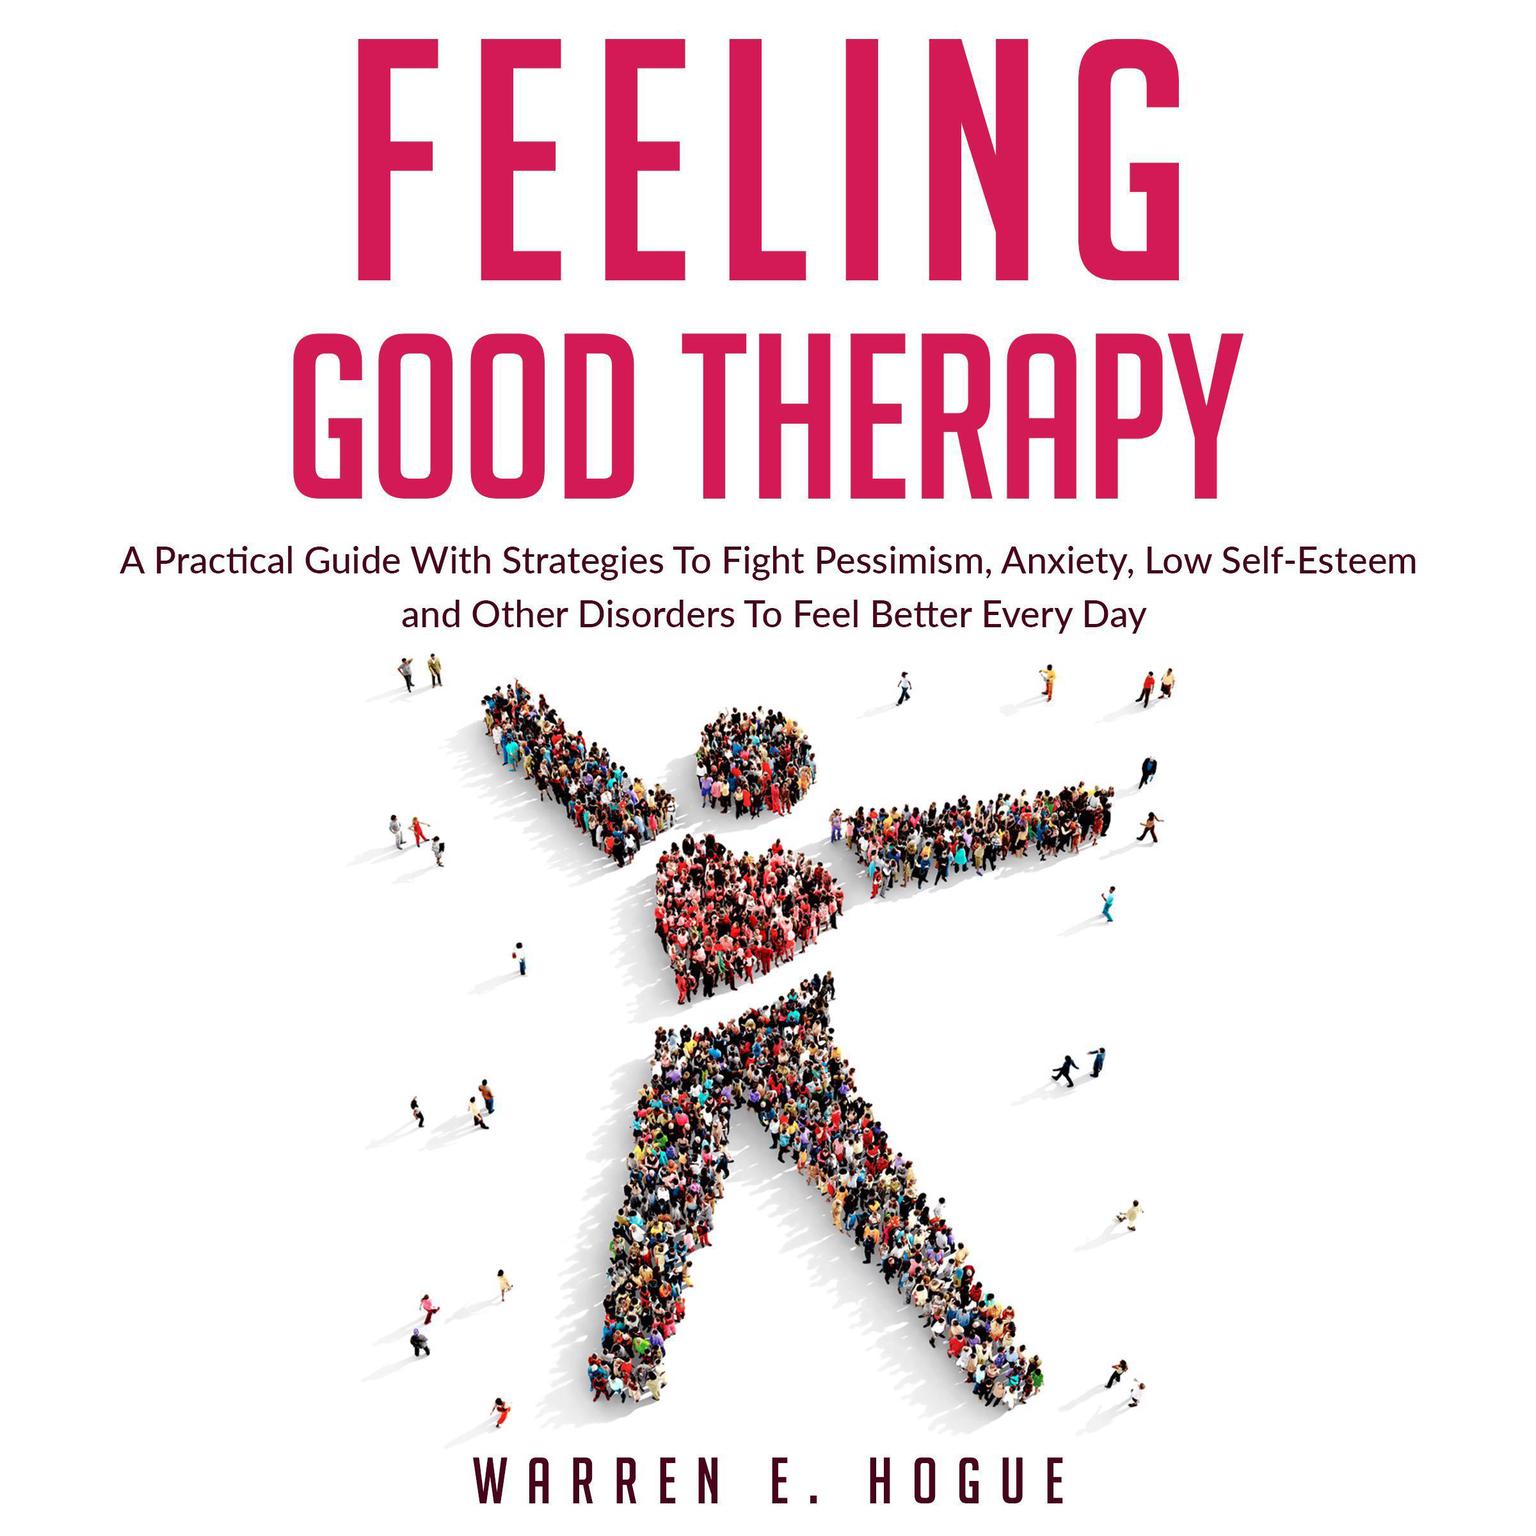 Feeling Good Therapy: A Practical Guide With Strategies To Fight Pessimism, Anxiety,Low Self-Esteem and Other Disorders To Feel Better Every Day Audiobook, by Warren E. Hogue